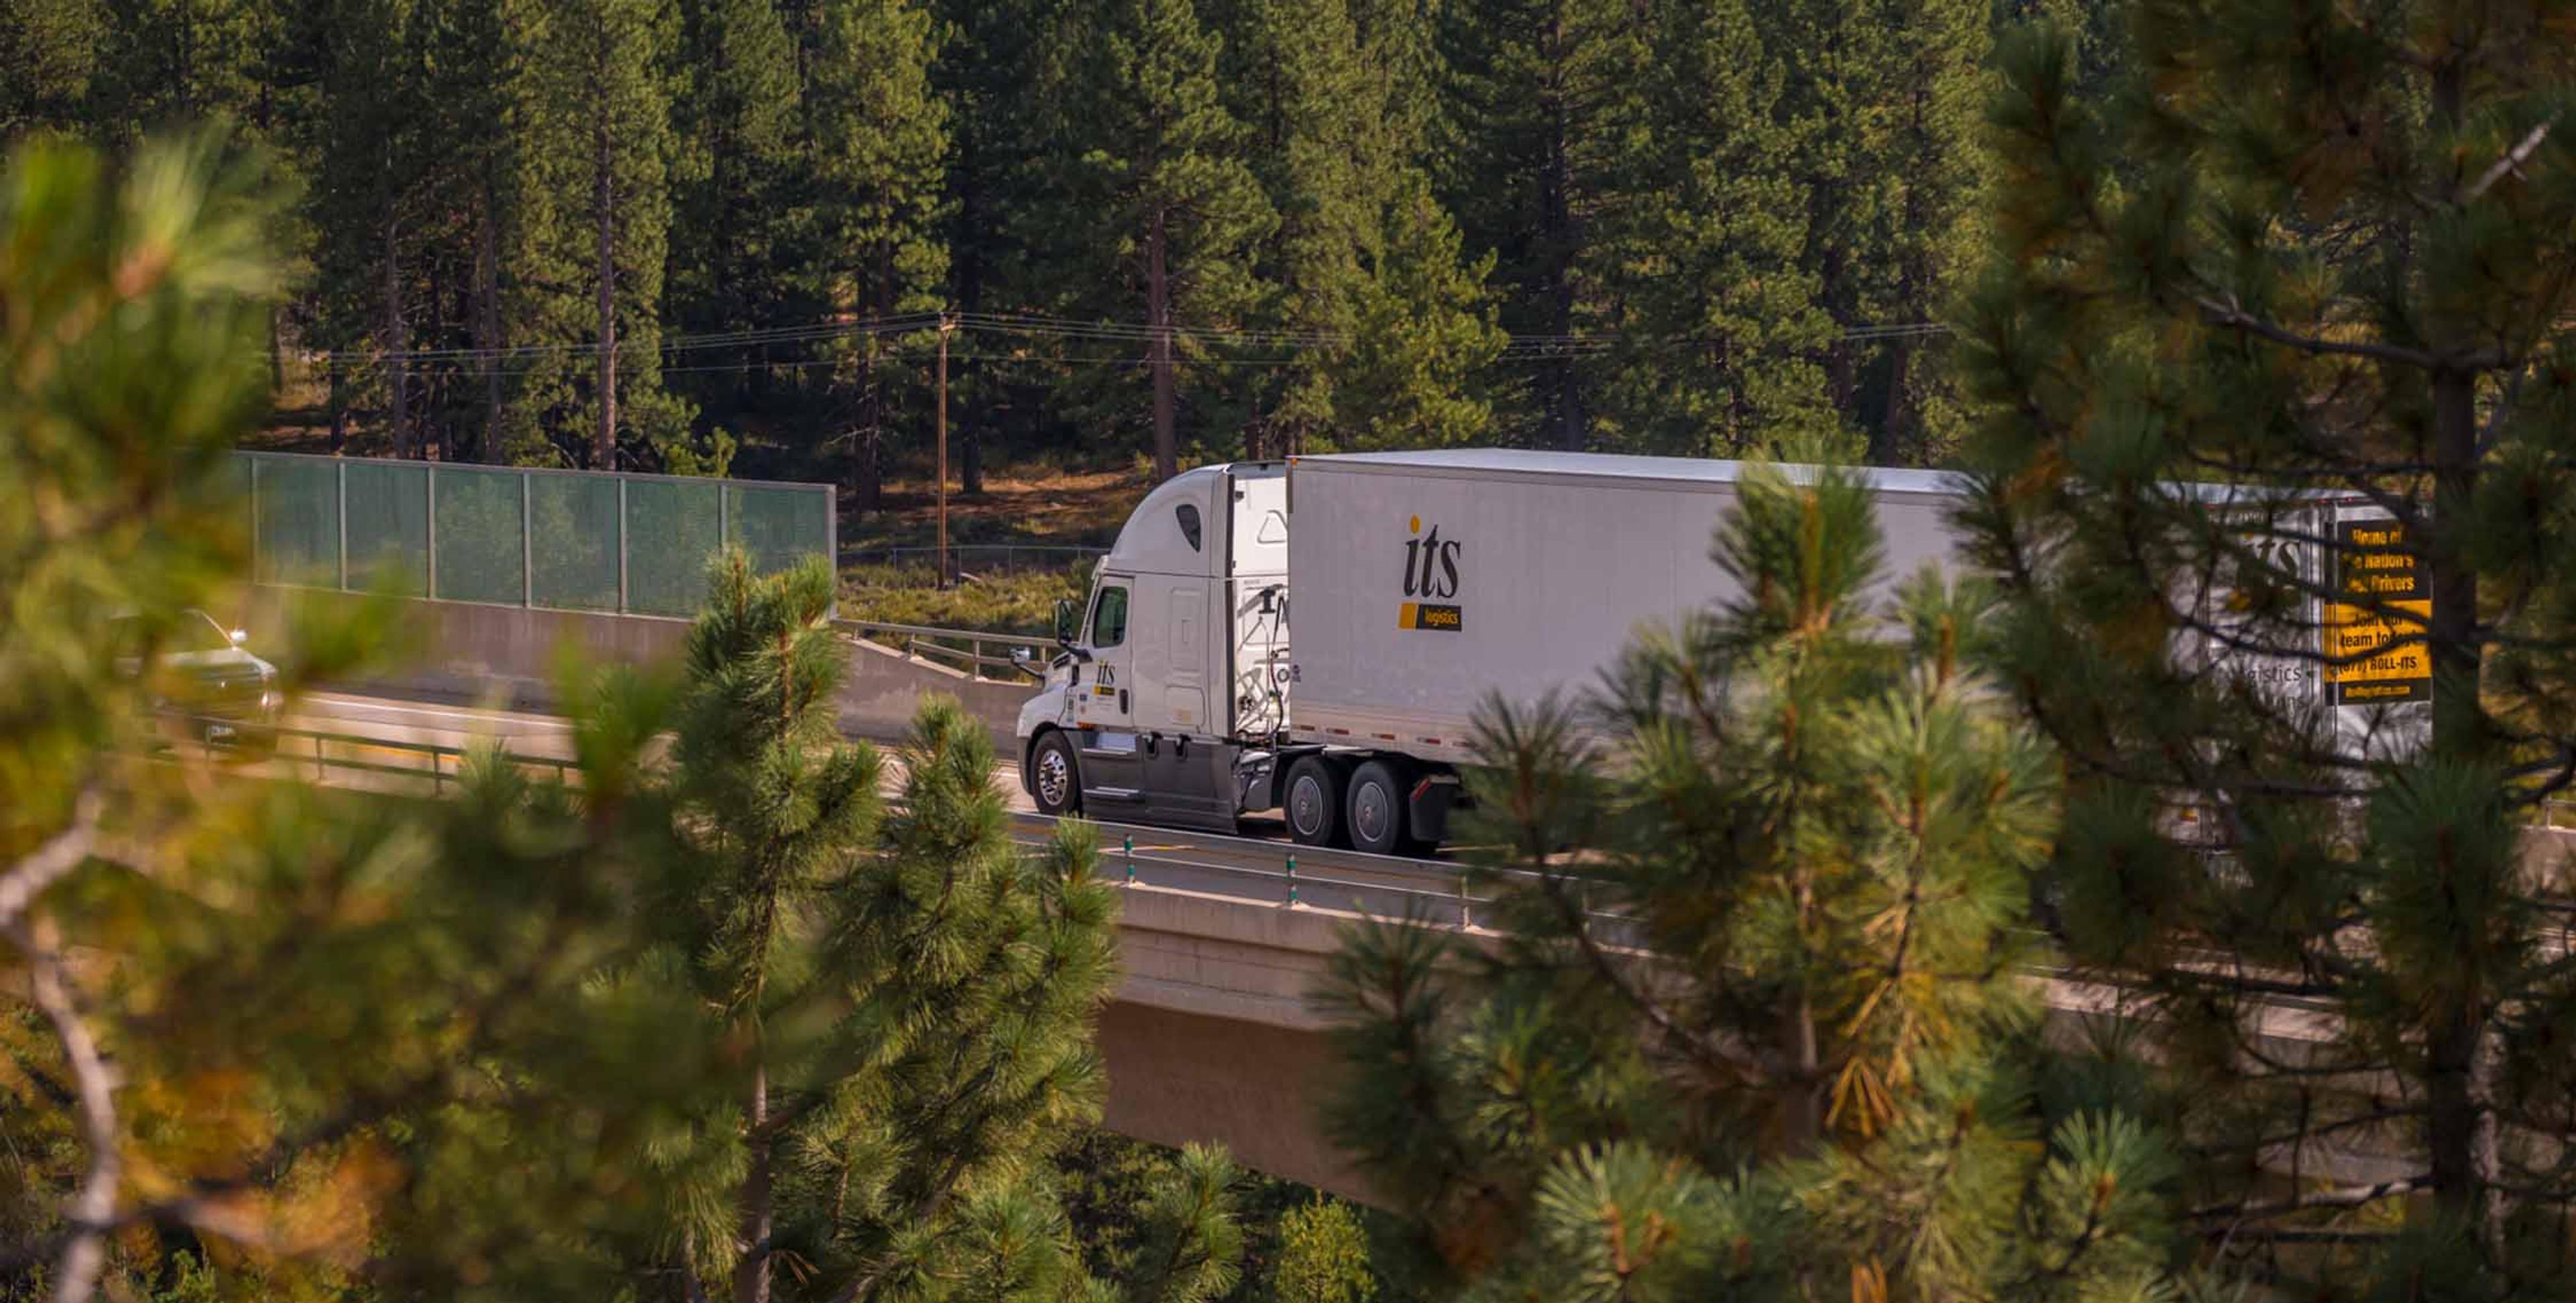 ITS truck driving on the freeway surrounded by lots of trees